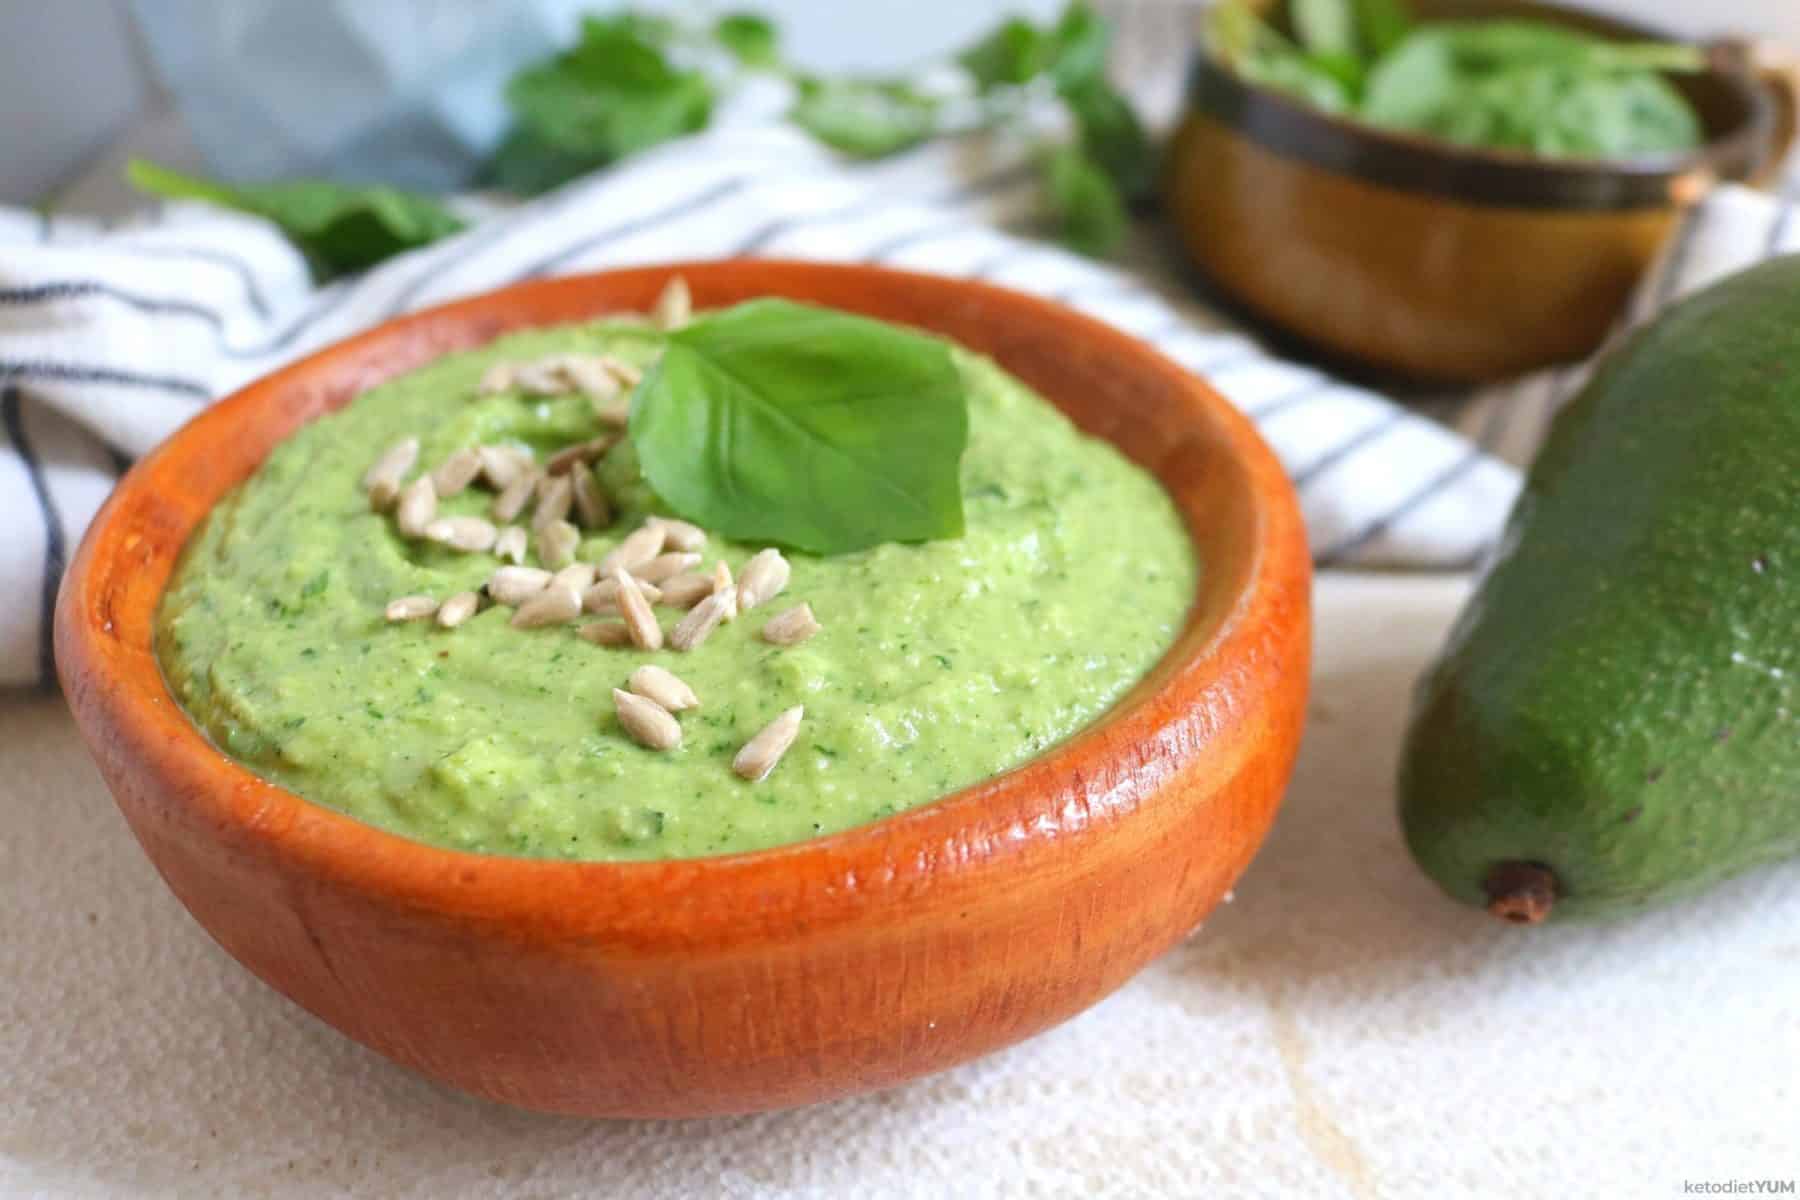 A bowl of avocado pesto sauce made with basil and spinach